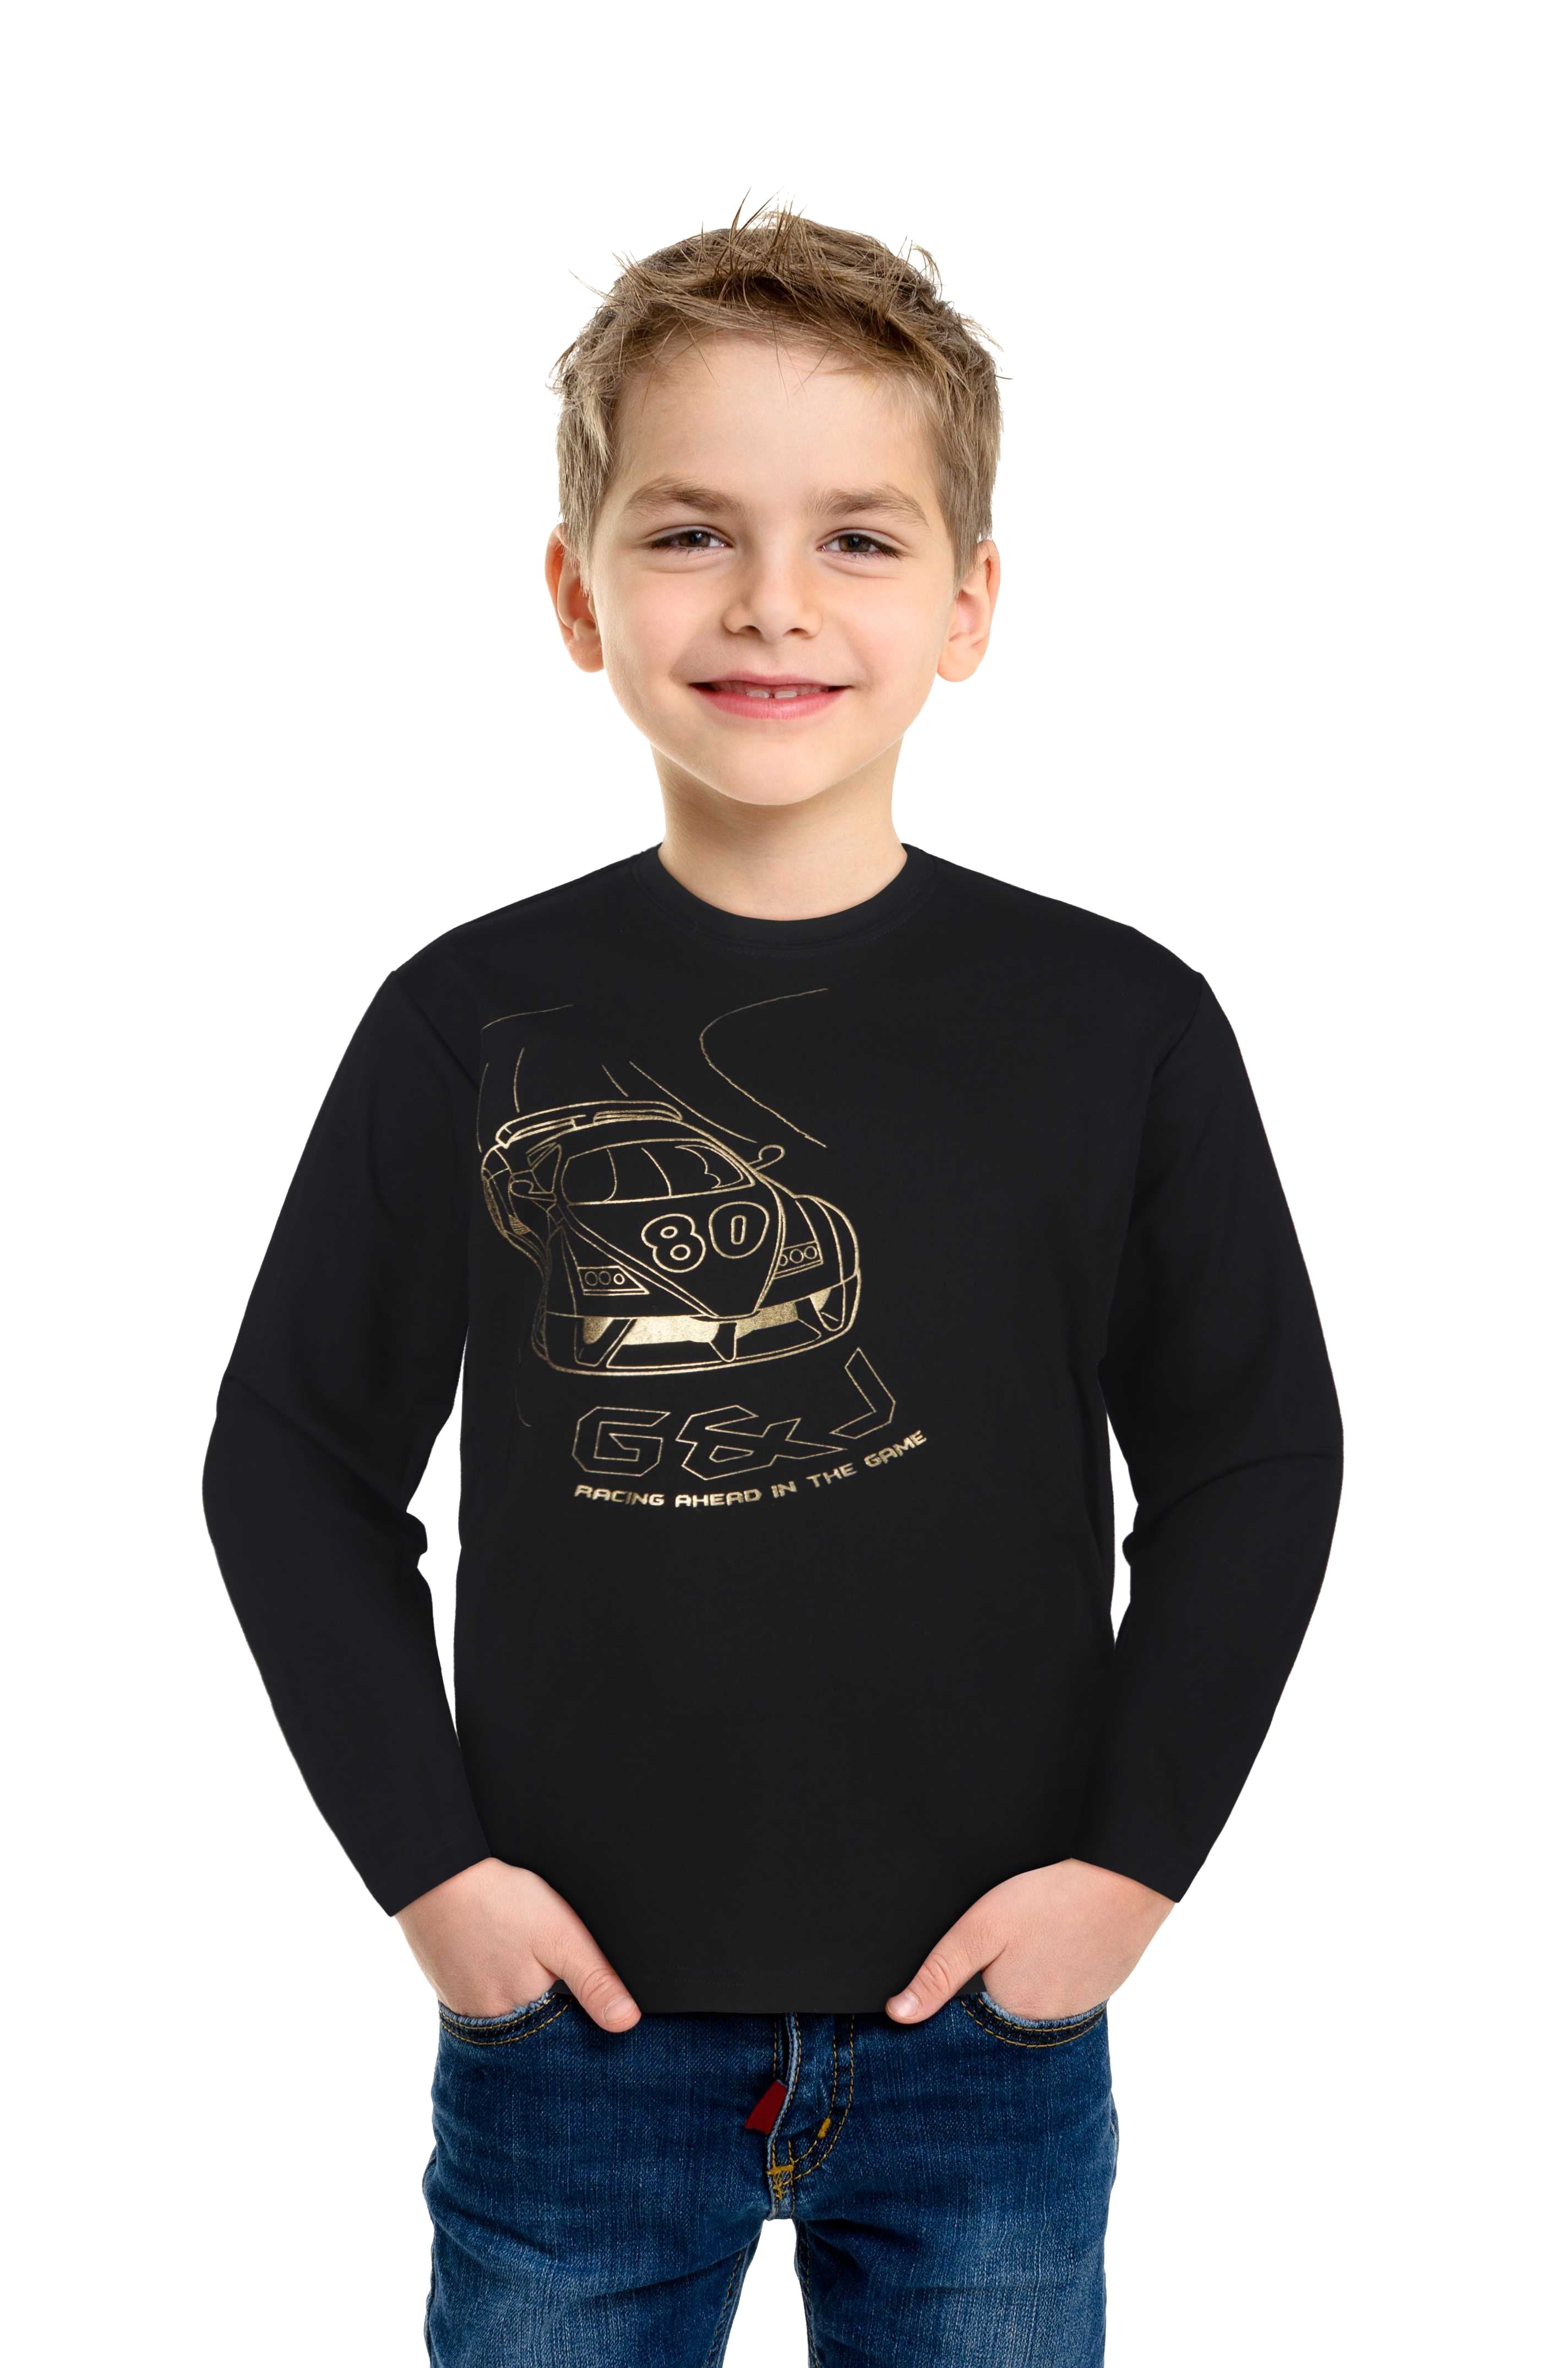 Boys black round neck knitted cotton printed t-shirt